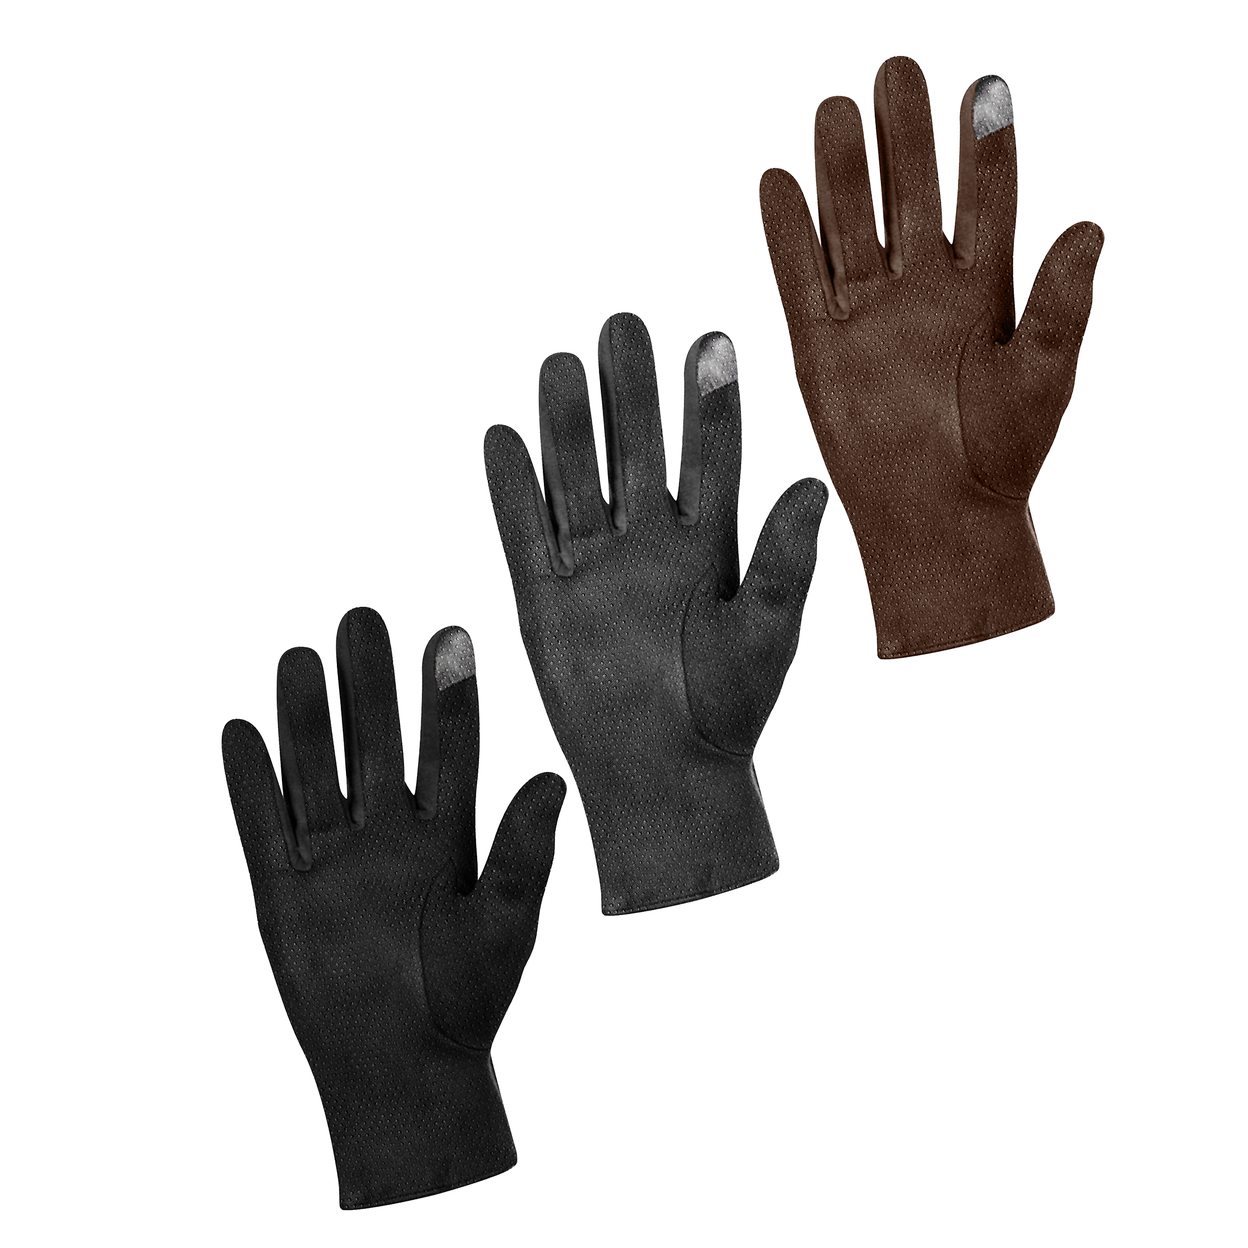 2-Pairs: Winter Warm Soft Lining Weather-Proof Touchscreen Suede Insulated Gloves - Black & Black